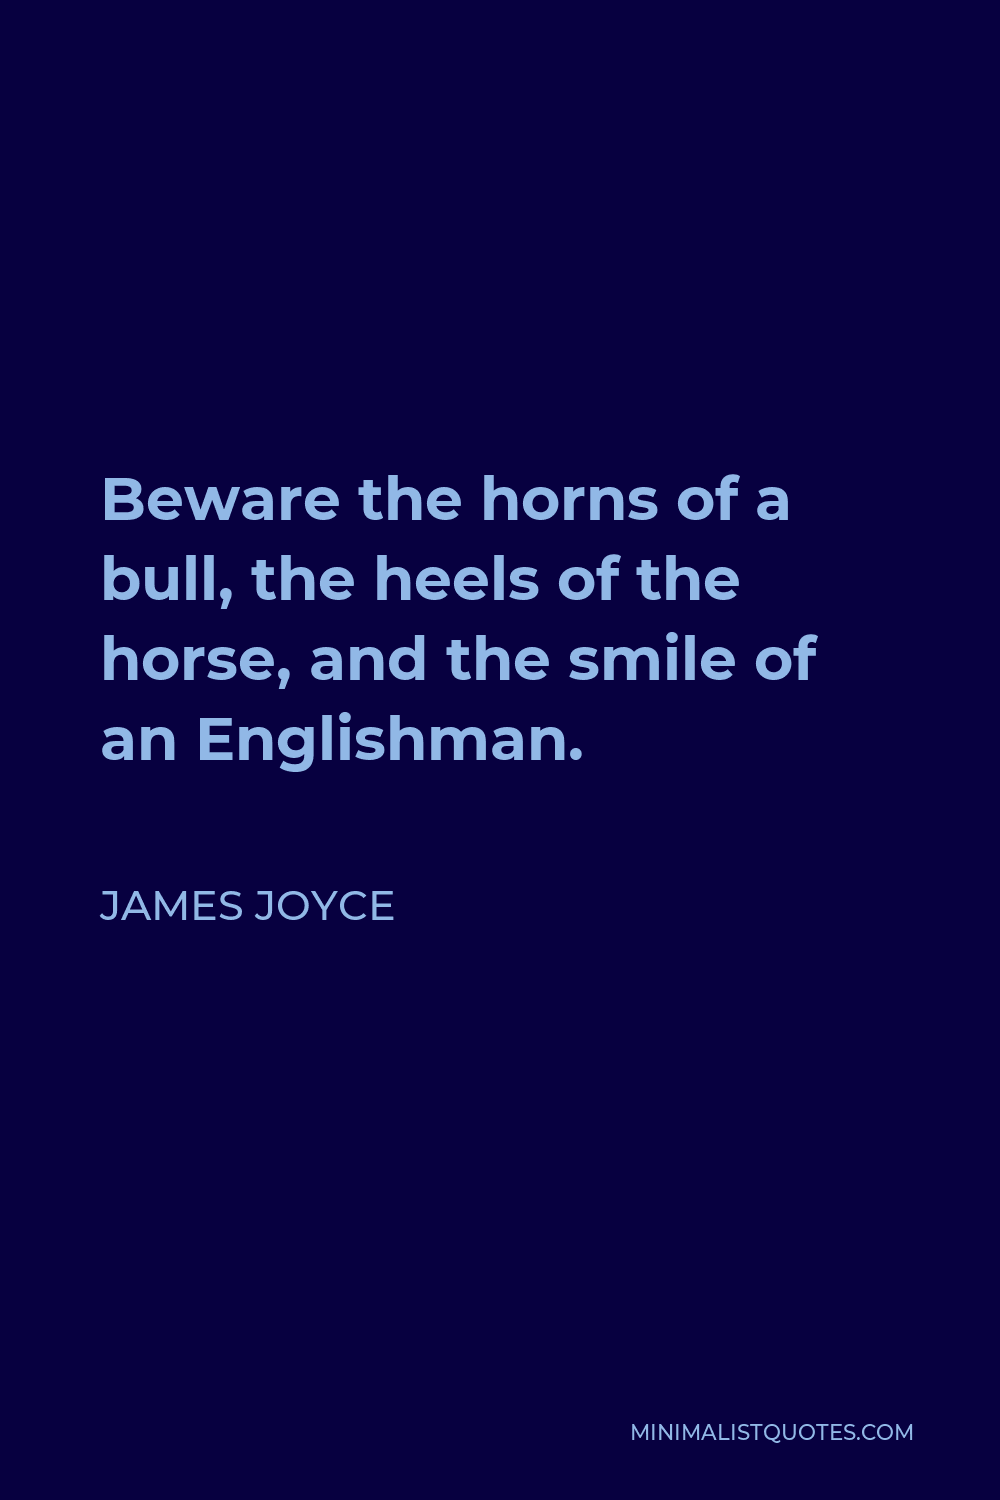 James Joyce Quote - Beware the horns of a bull, the heels of the horse, and the smile of an Englishman.